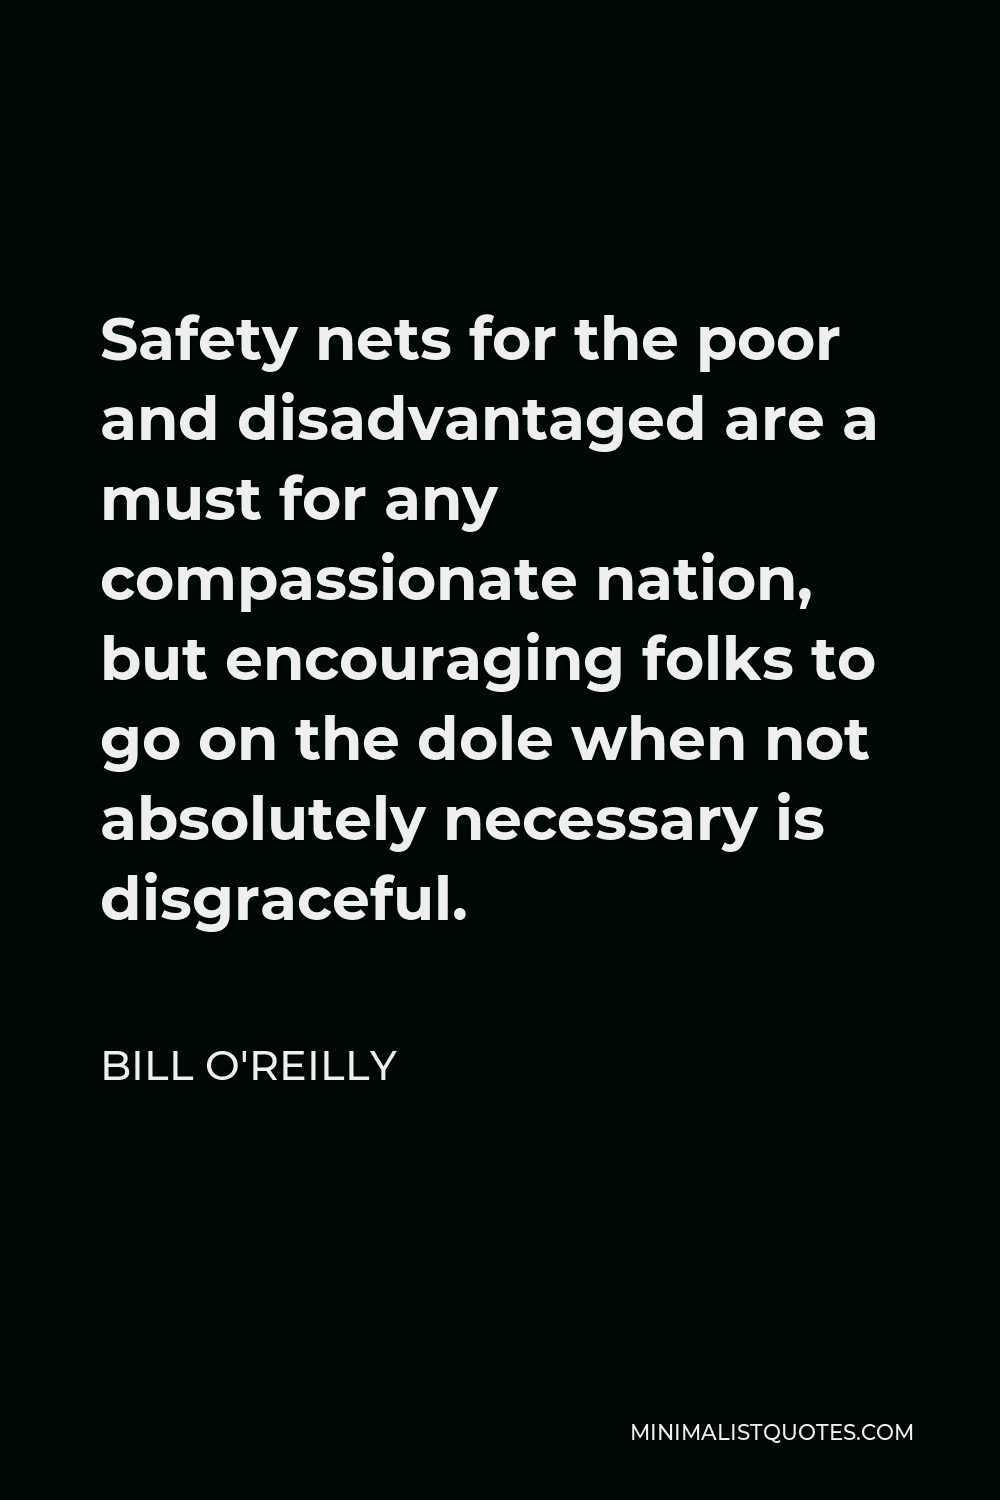 Bill O'Reilly Quote - Safety nets for the poor and disadvantaged are a must for any compassionate nation, but encouraging folks to go on the dole when not absolutely necessary is disgraceful.